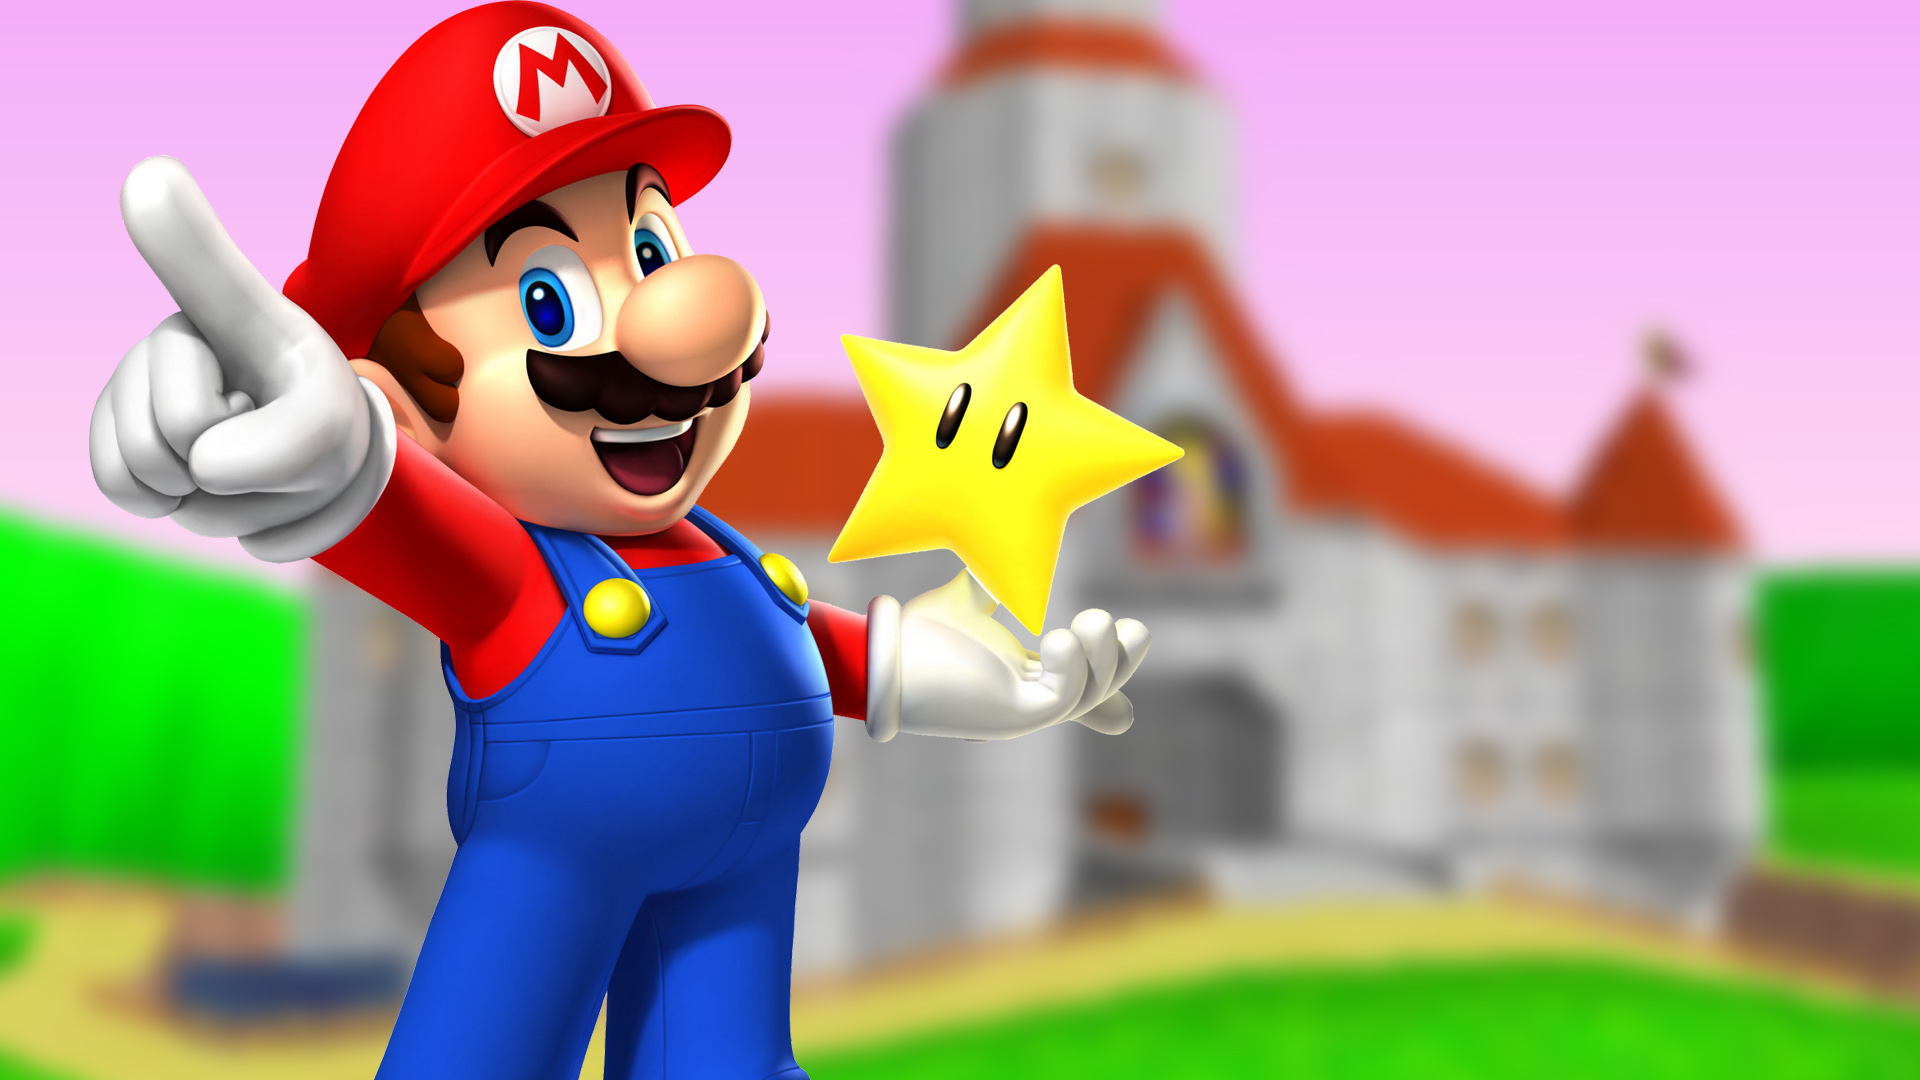 Ranking EVERY New Super Mario Bros Game WORST TO BEST (Top 5 Games